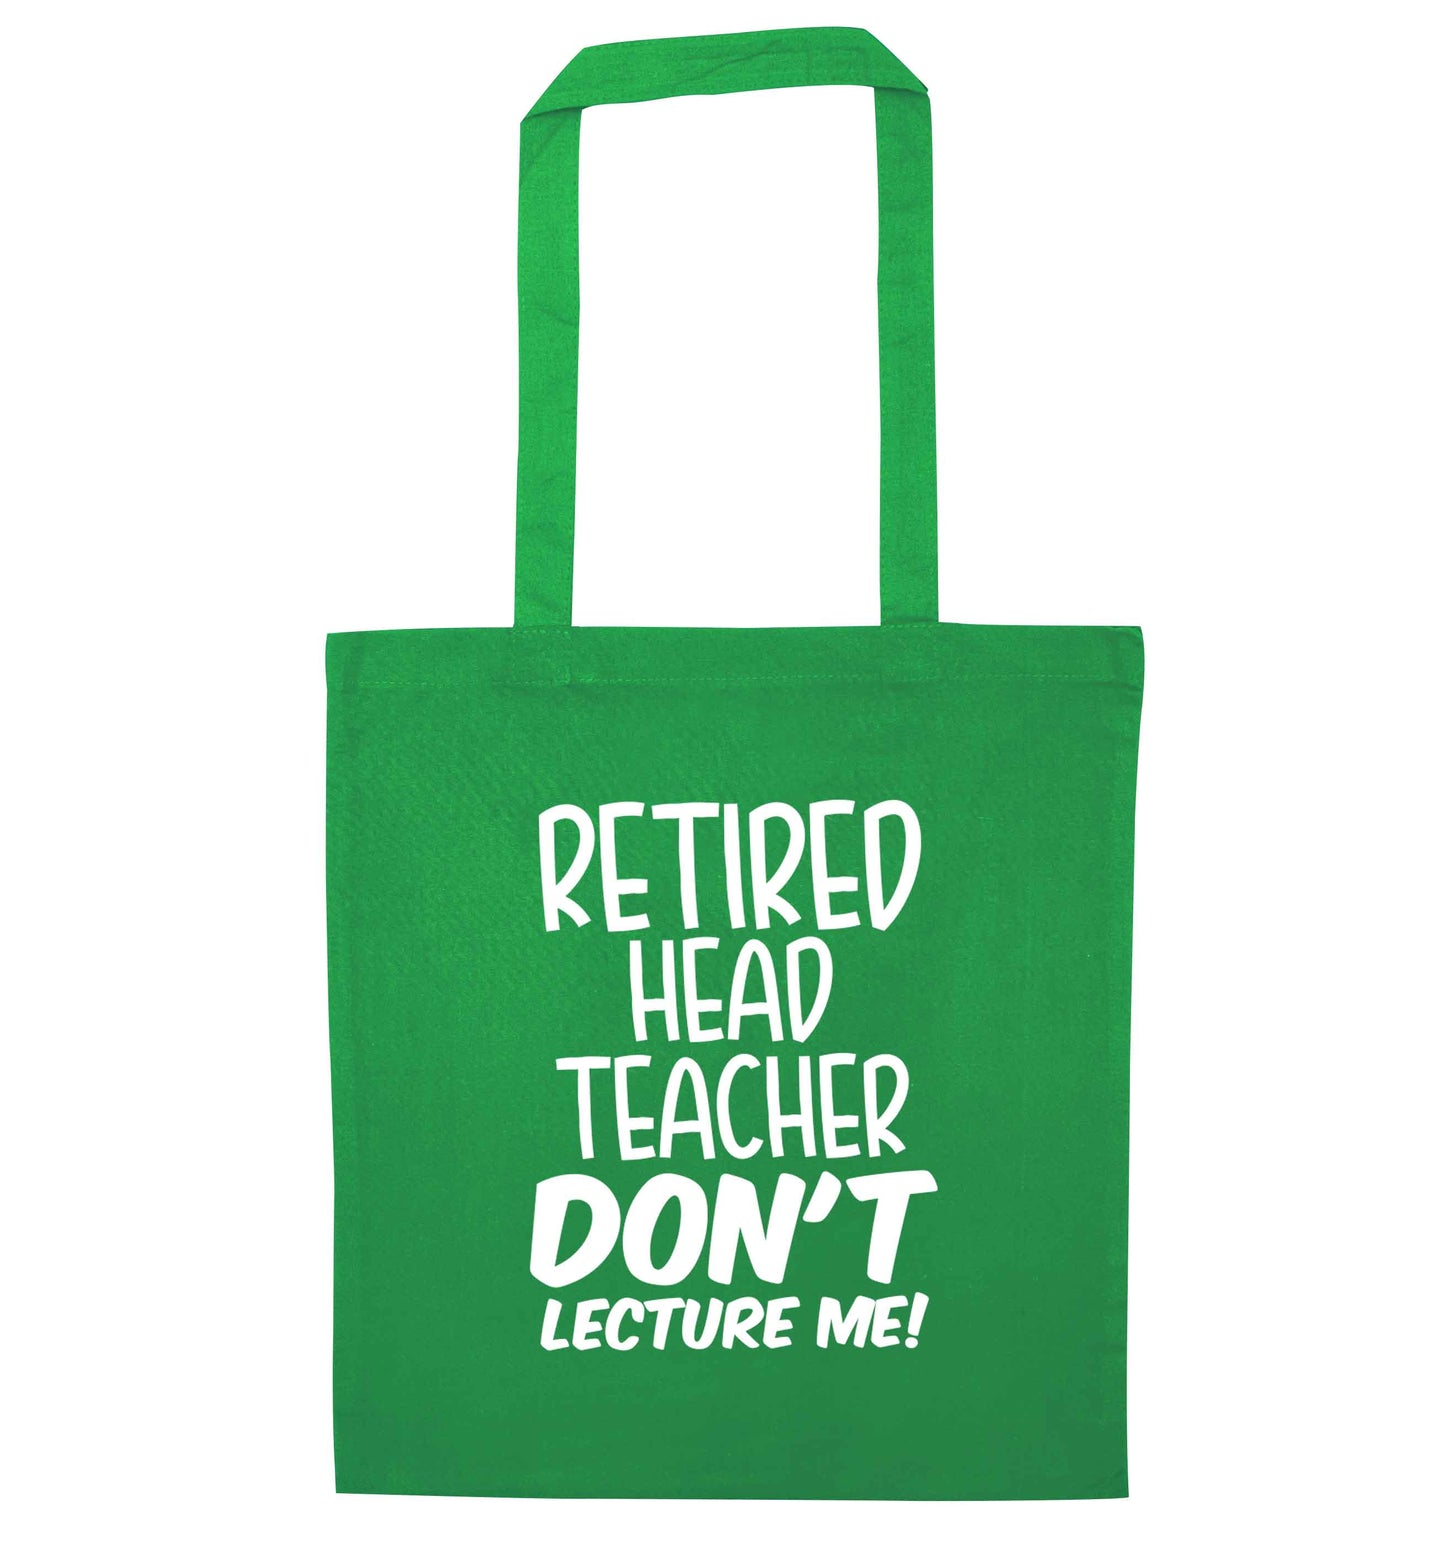 Retired head teacher don't lecture me! green tote bag